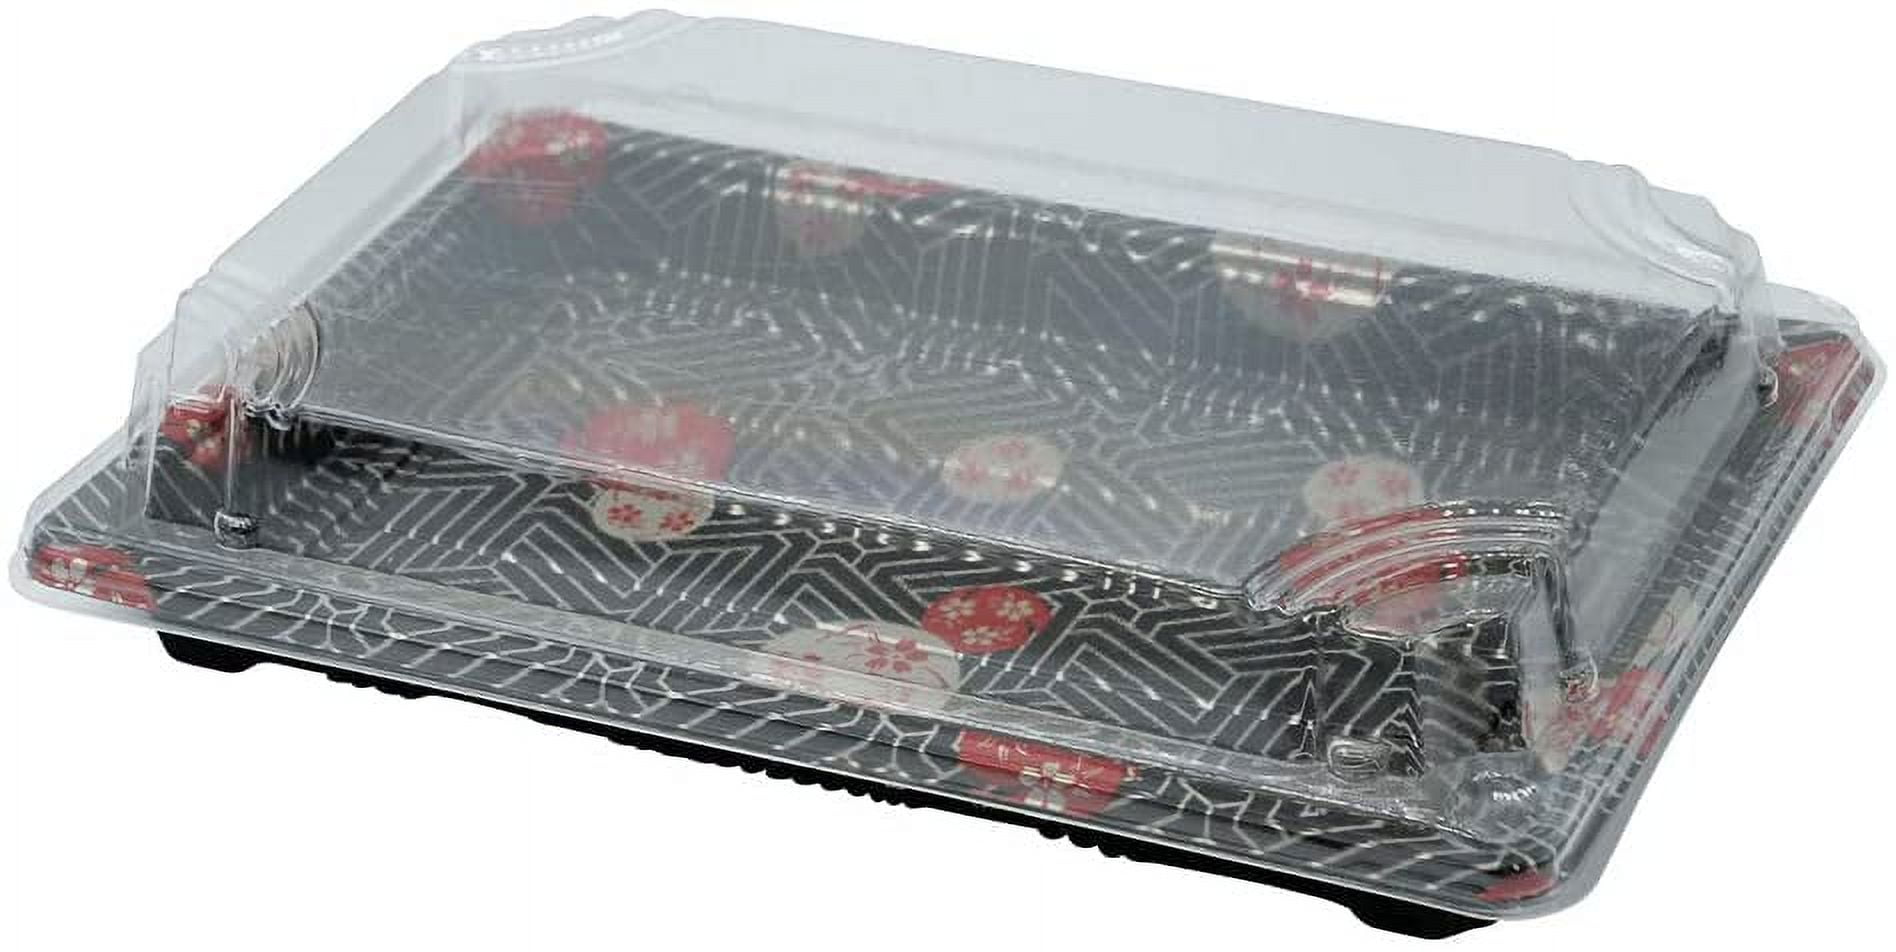 Restaurantware Roku 8.75 x 5.5 inch Sushi Trays, 100 Disposable Sushi Containers with Lids - Large, Rectangle, Black Plastic to Go Containers, for